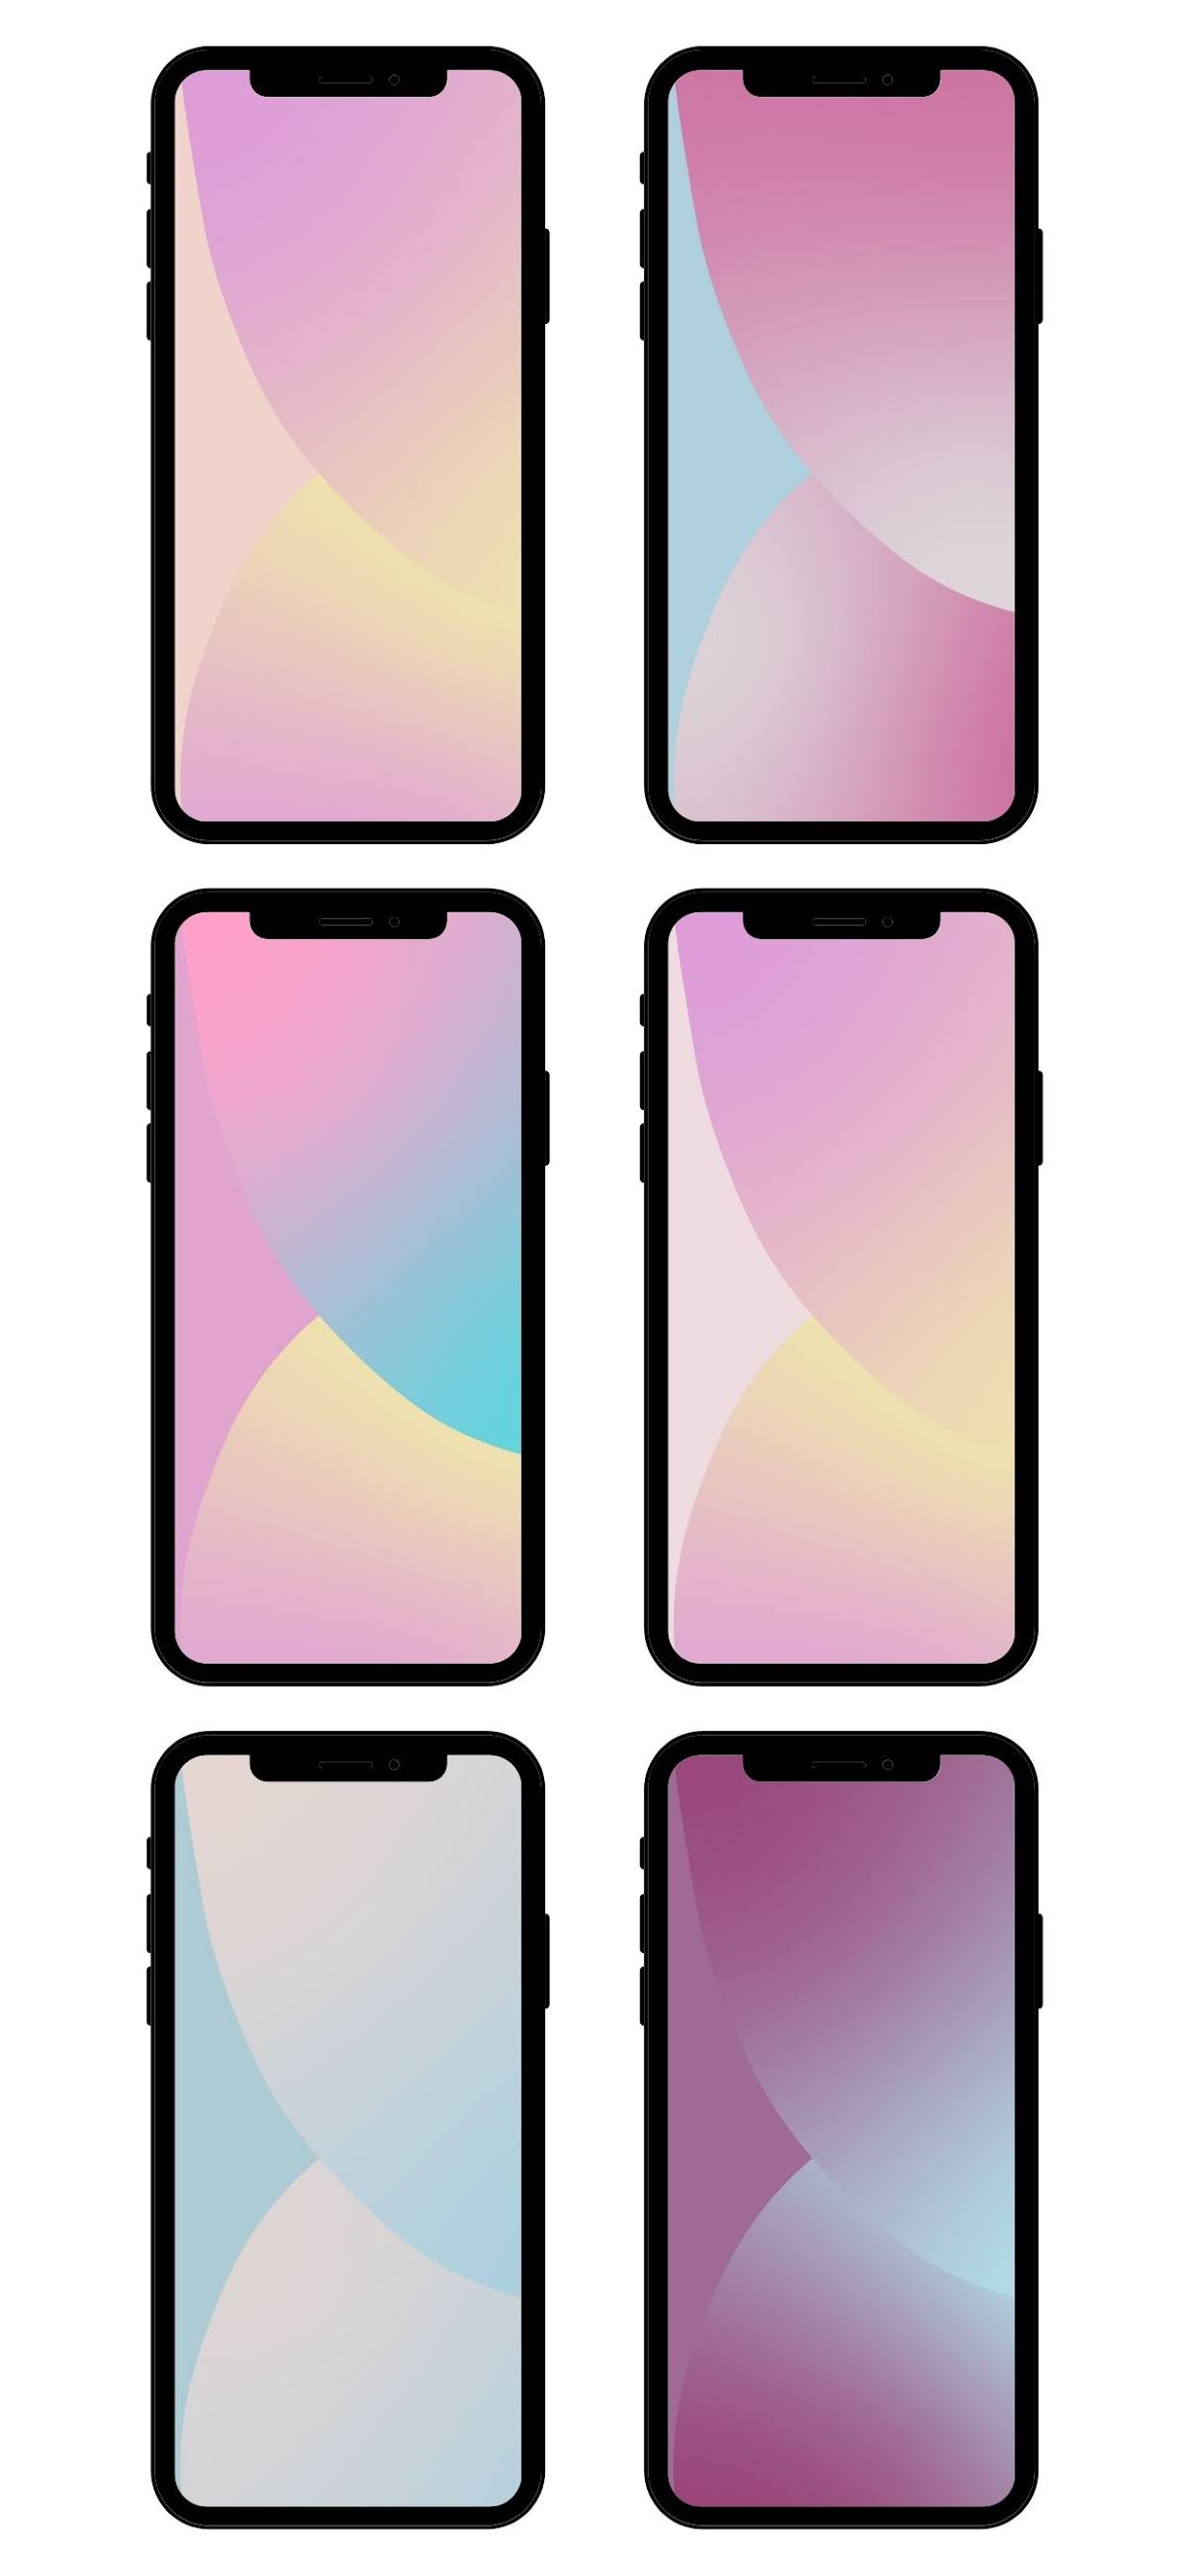 ios 14 aesthetic wallpapers